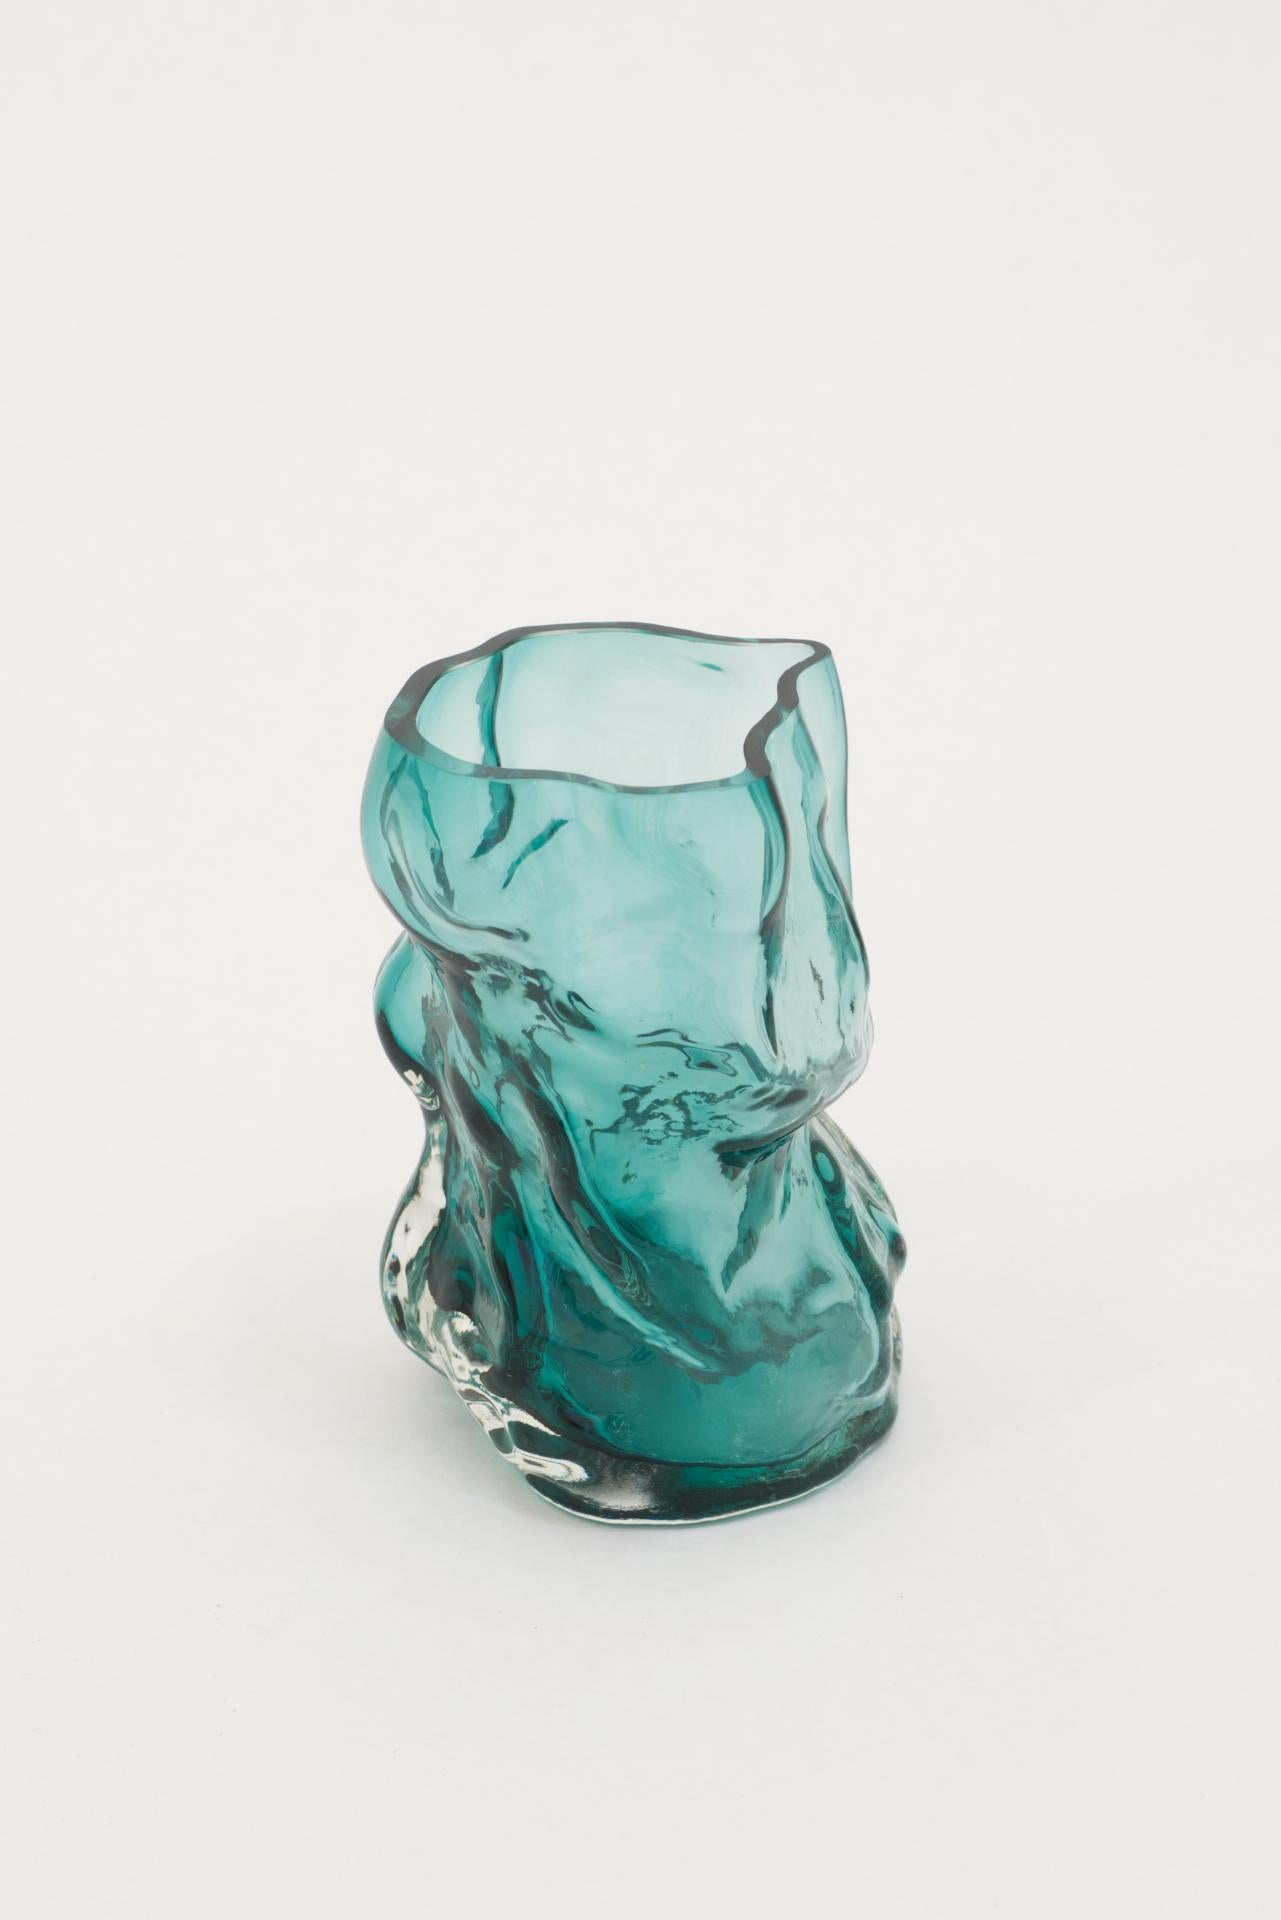 Moulded and then mouth blown glass

One of a kind

The Mountain vases by FOS embody the surface of the mountain, calibrated to the size of human interiors. FOS explains, “It’s limited what references an object into a vase, other than a flower: A